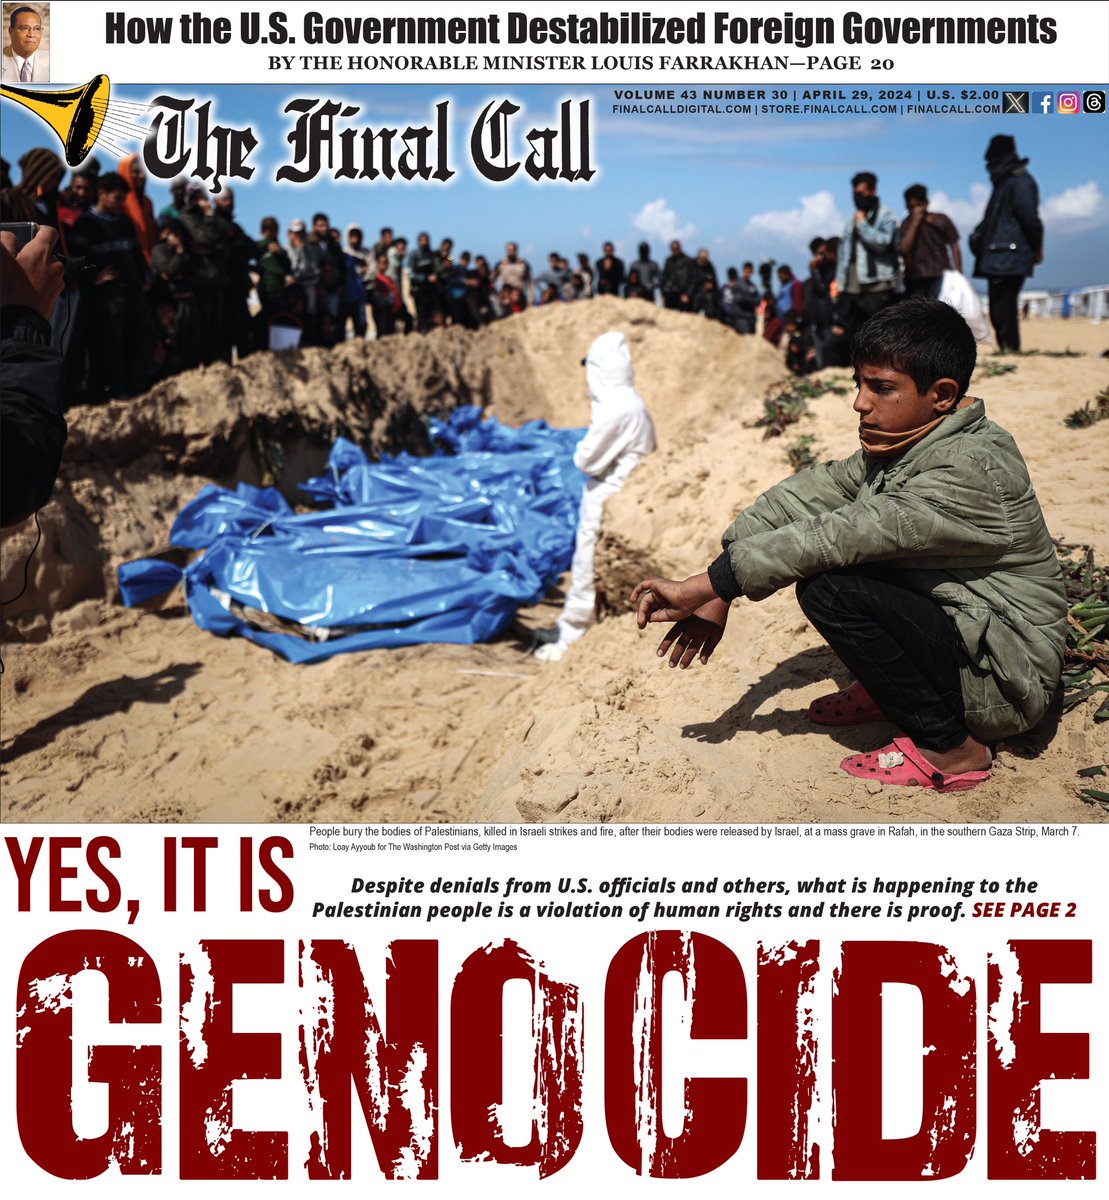 NEW EDITION ::: YES, IT IS GENOCIDE Despite denials from U.S. officials and others, what is happening to the Palestinian people is a violation of human rights and there is proof. Read more at finalcall.com